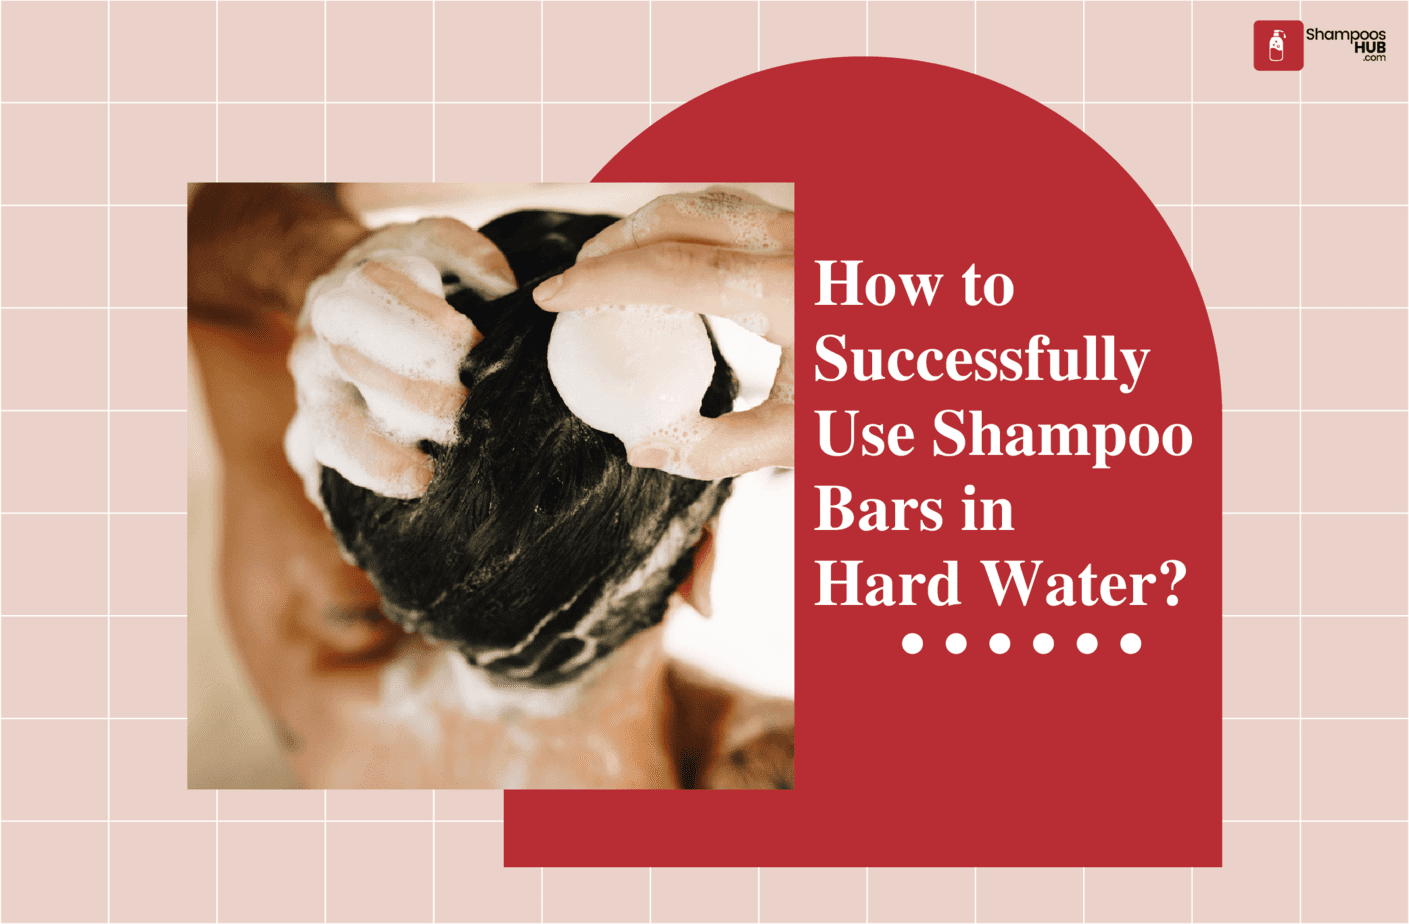 How to Use Shampoo Bars in Hard Water?